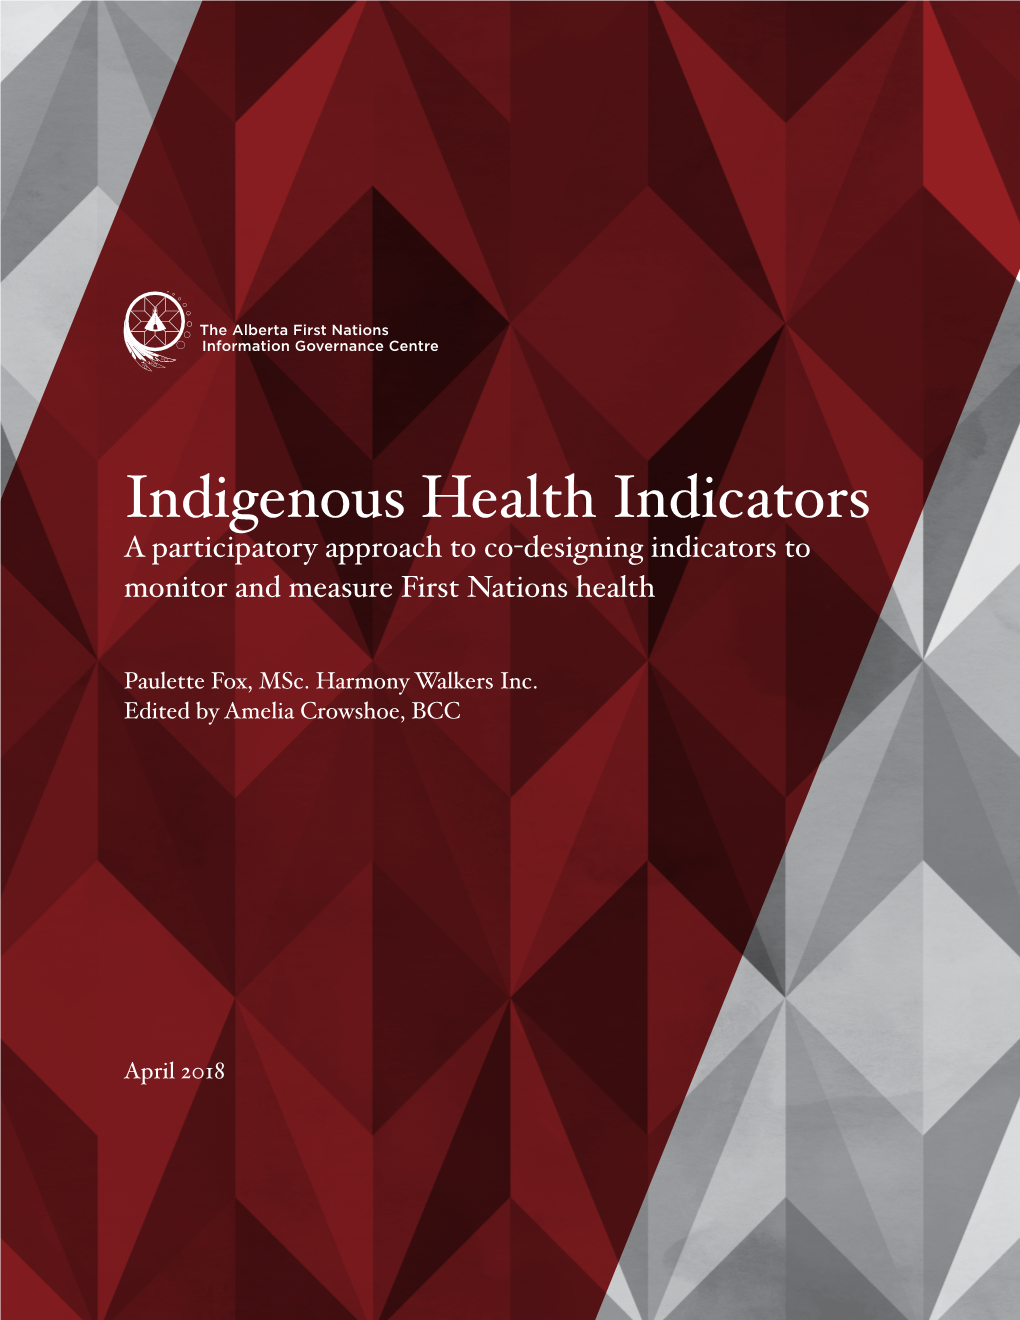 Indigenous Health Indicators a Participatory Approach to Co-Designing Indicators to Monitor and Measure First Nations Health